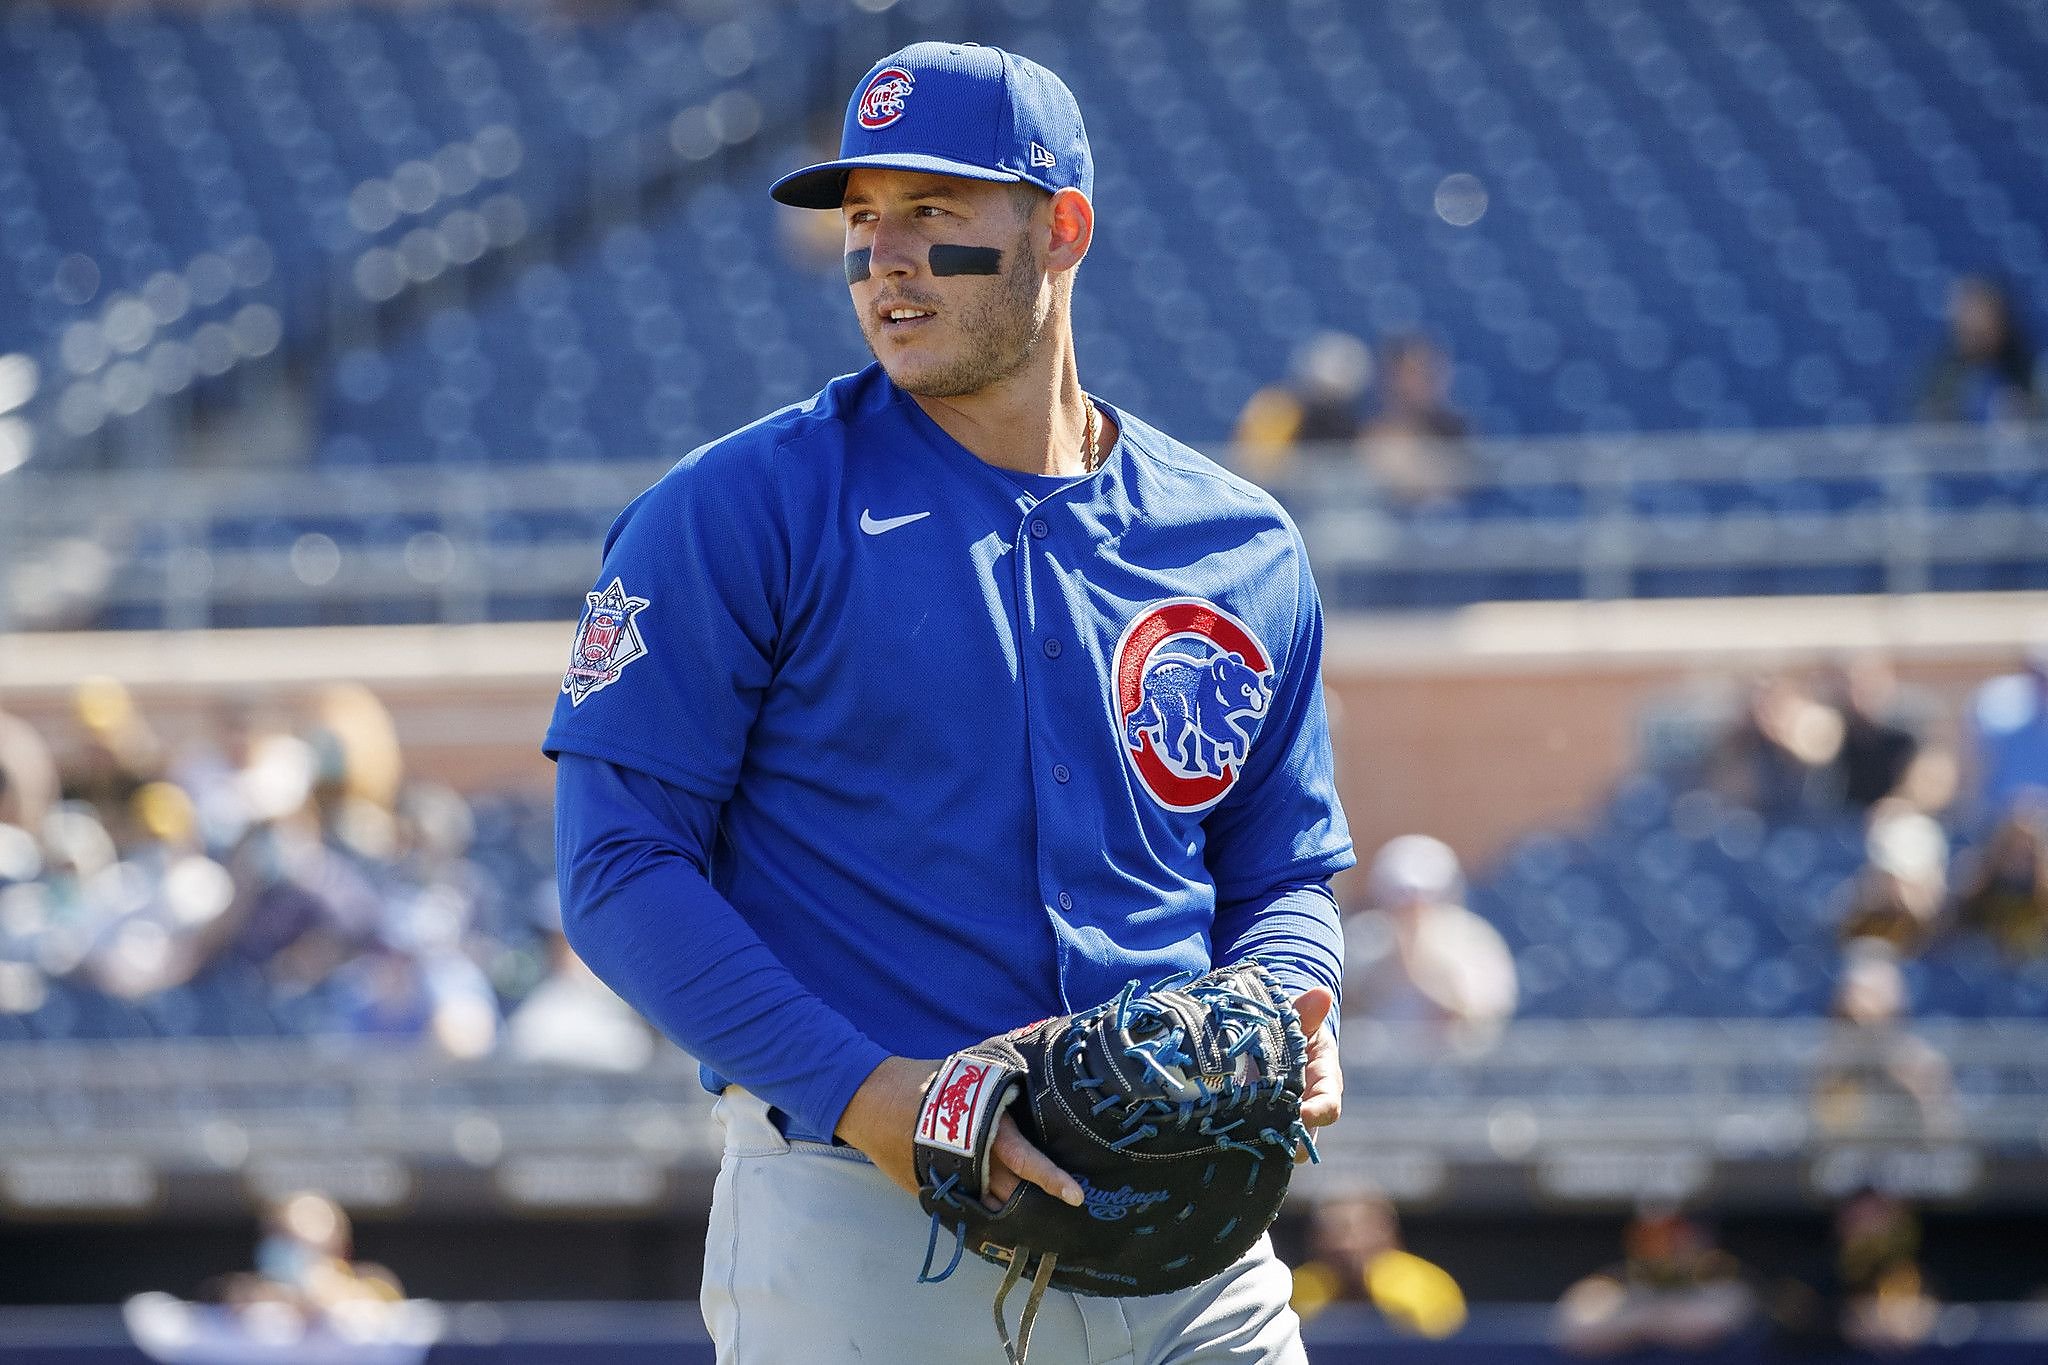 Former Cubs 1B Anthony Rizzo has a new MLB contract